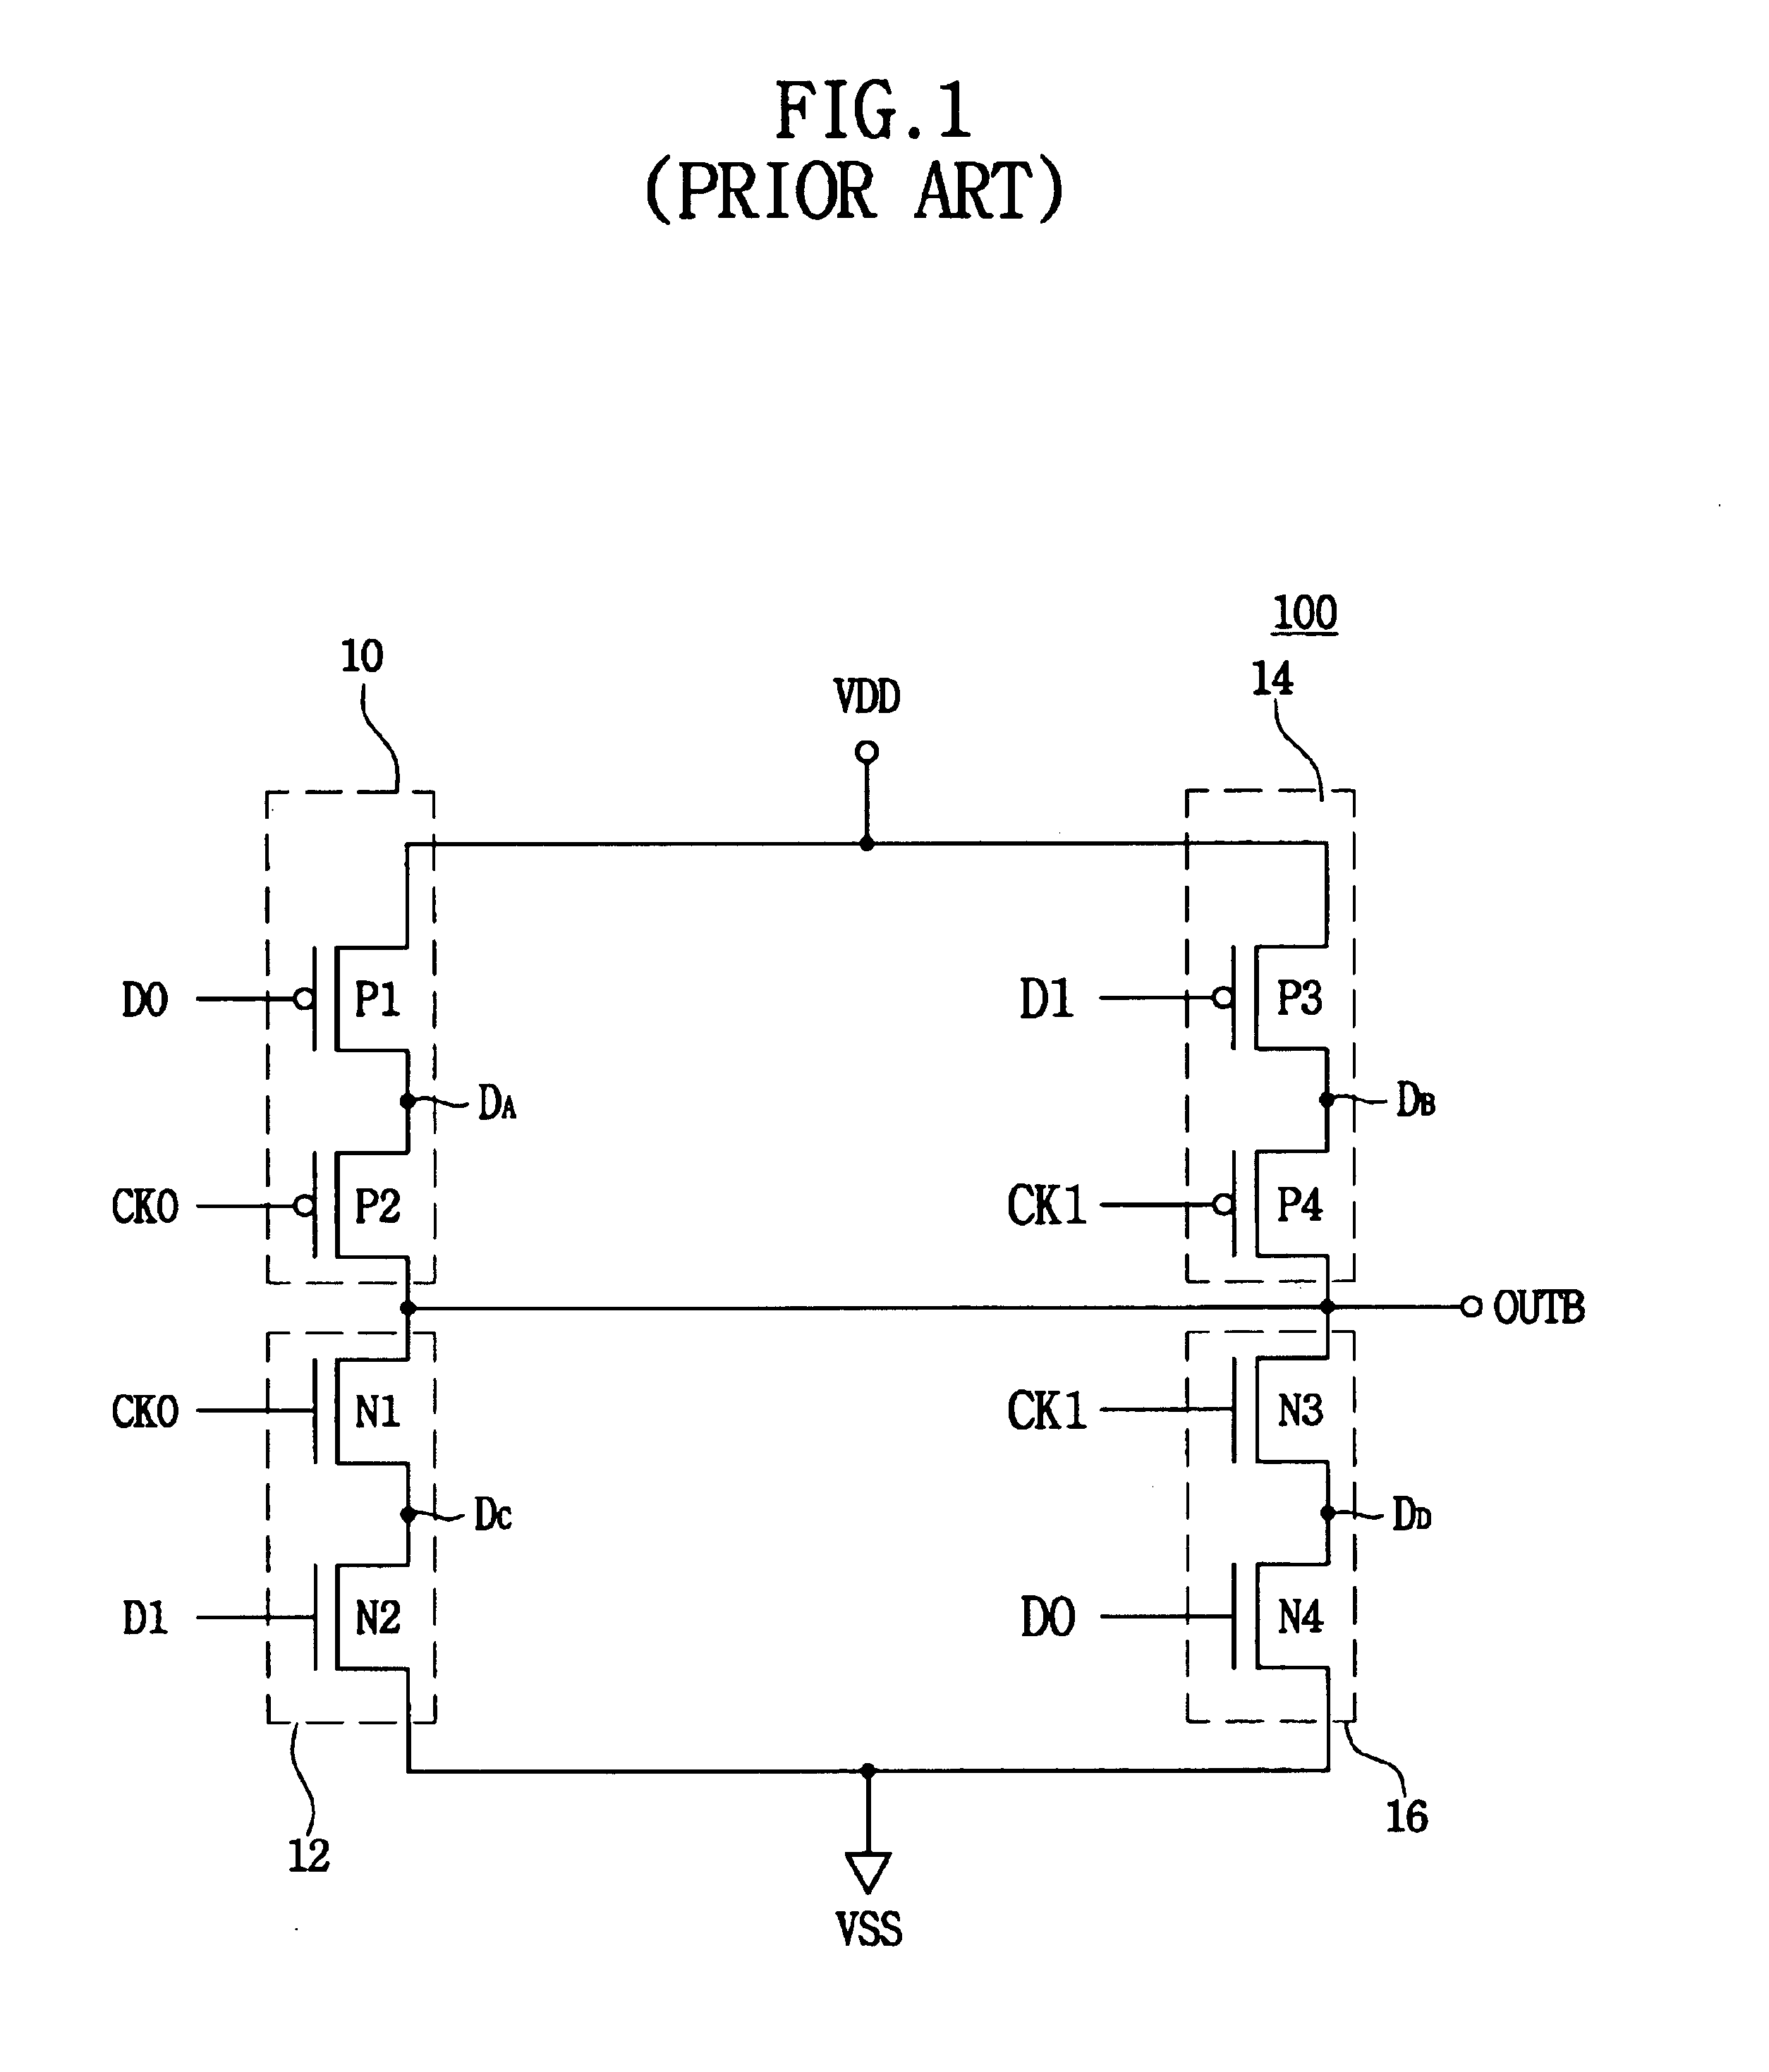 Serializer and method of serializing parallel data into serial data stream